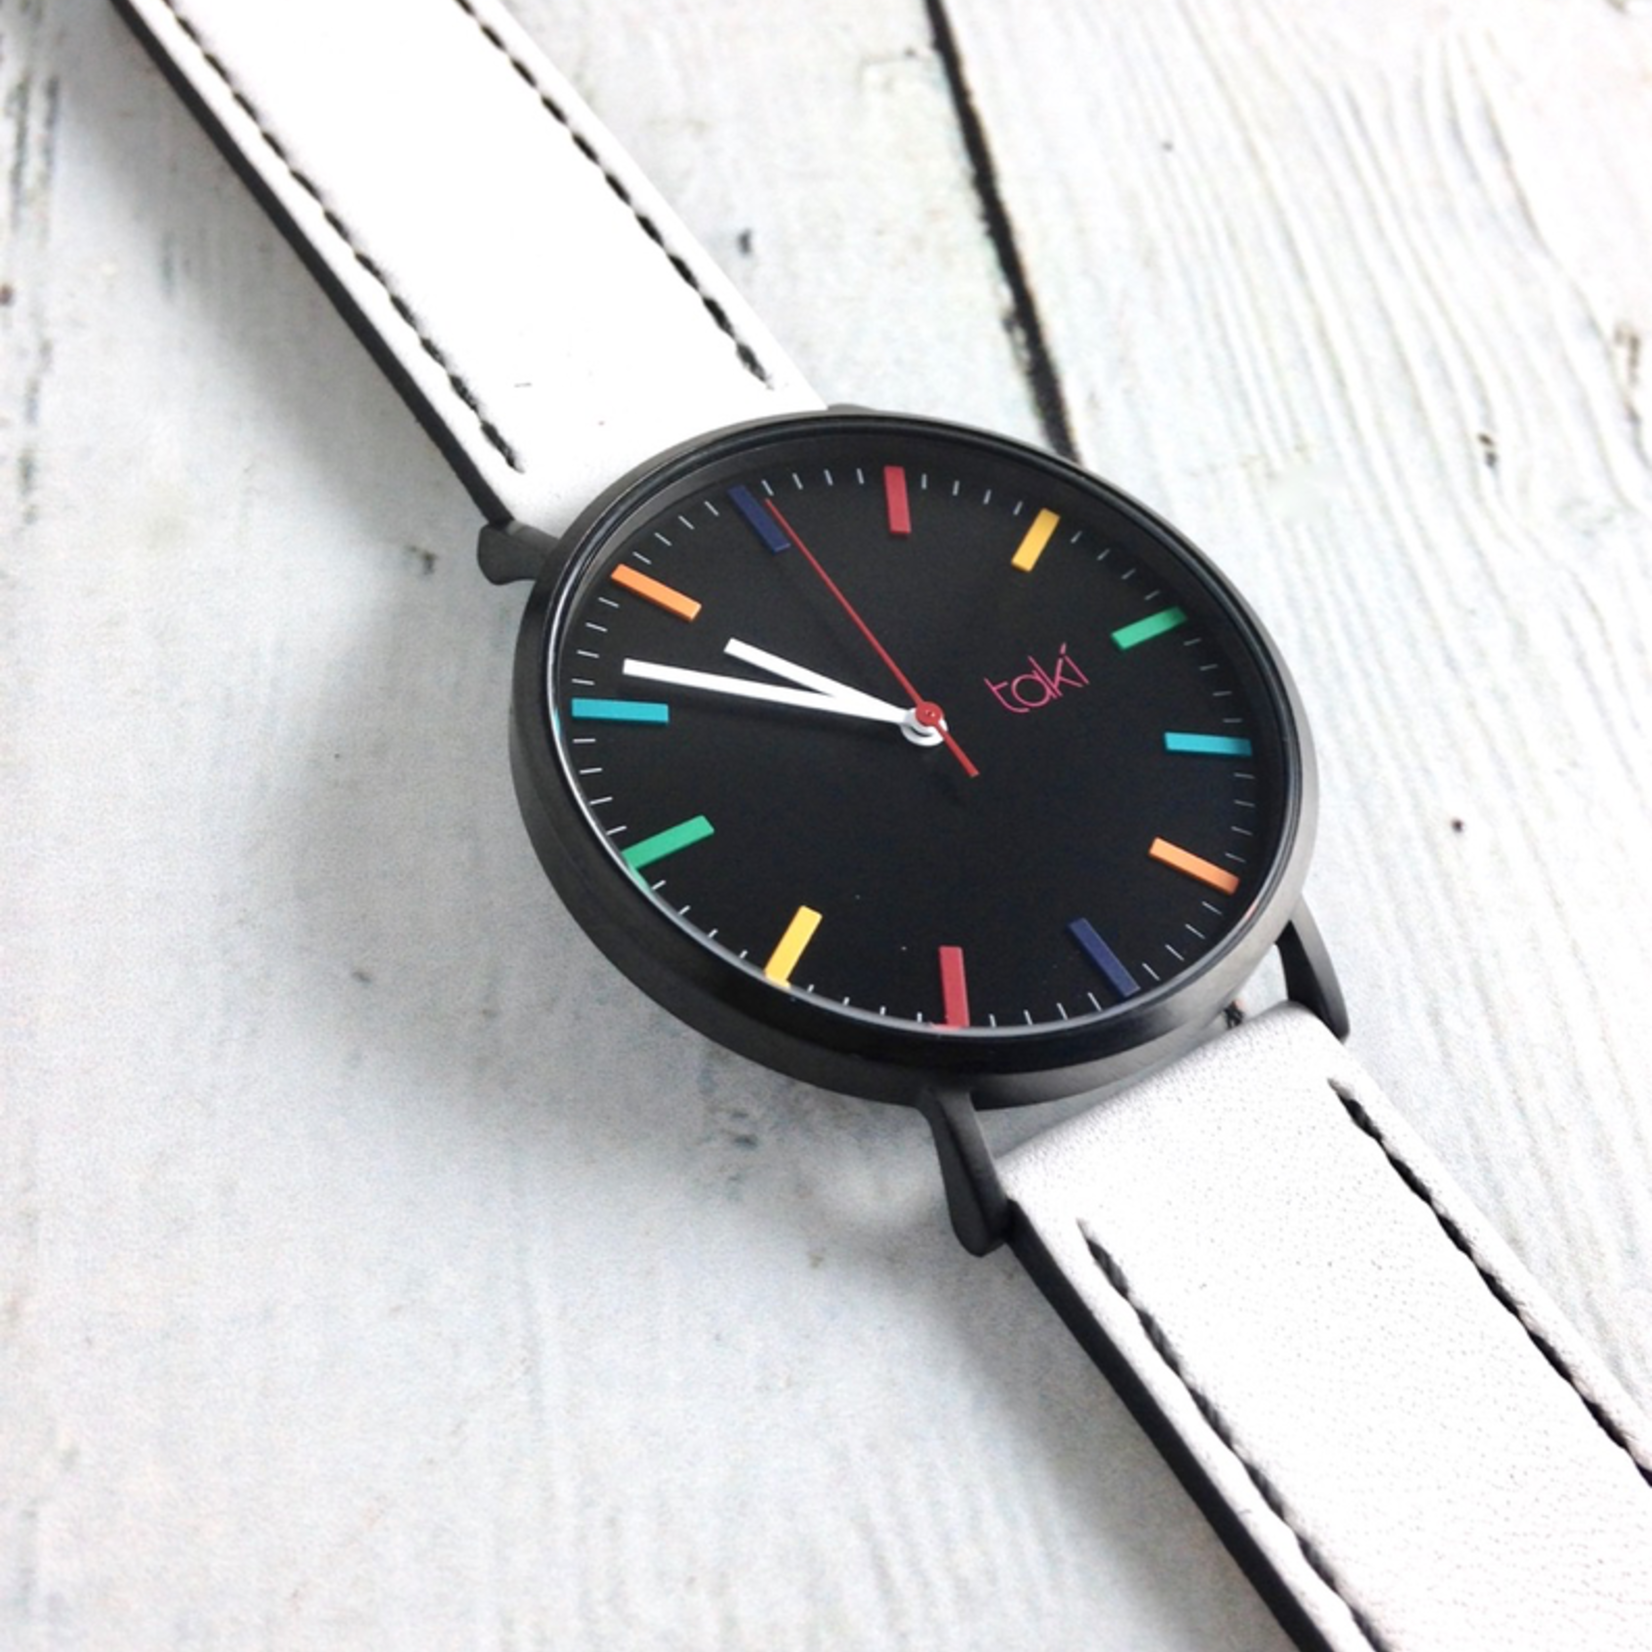 Linden Watch, Black Face and White Band with a Rainbow of indicators